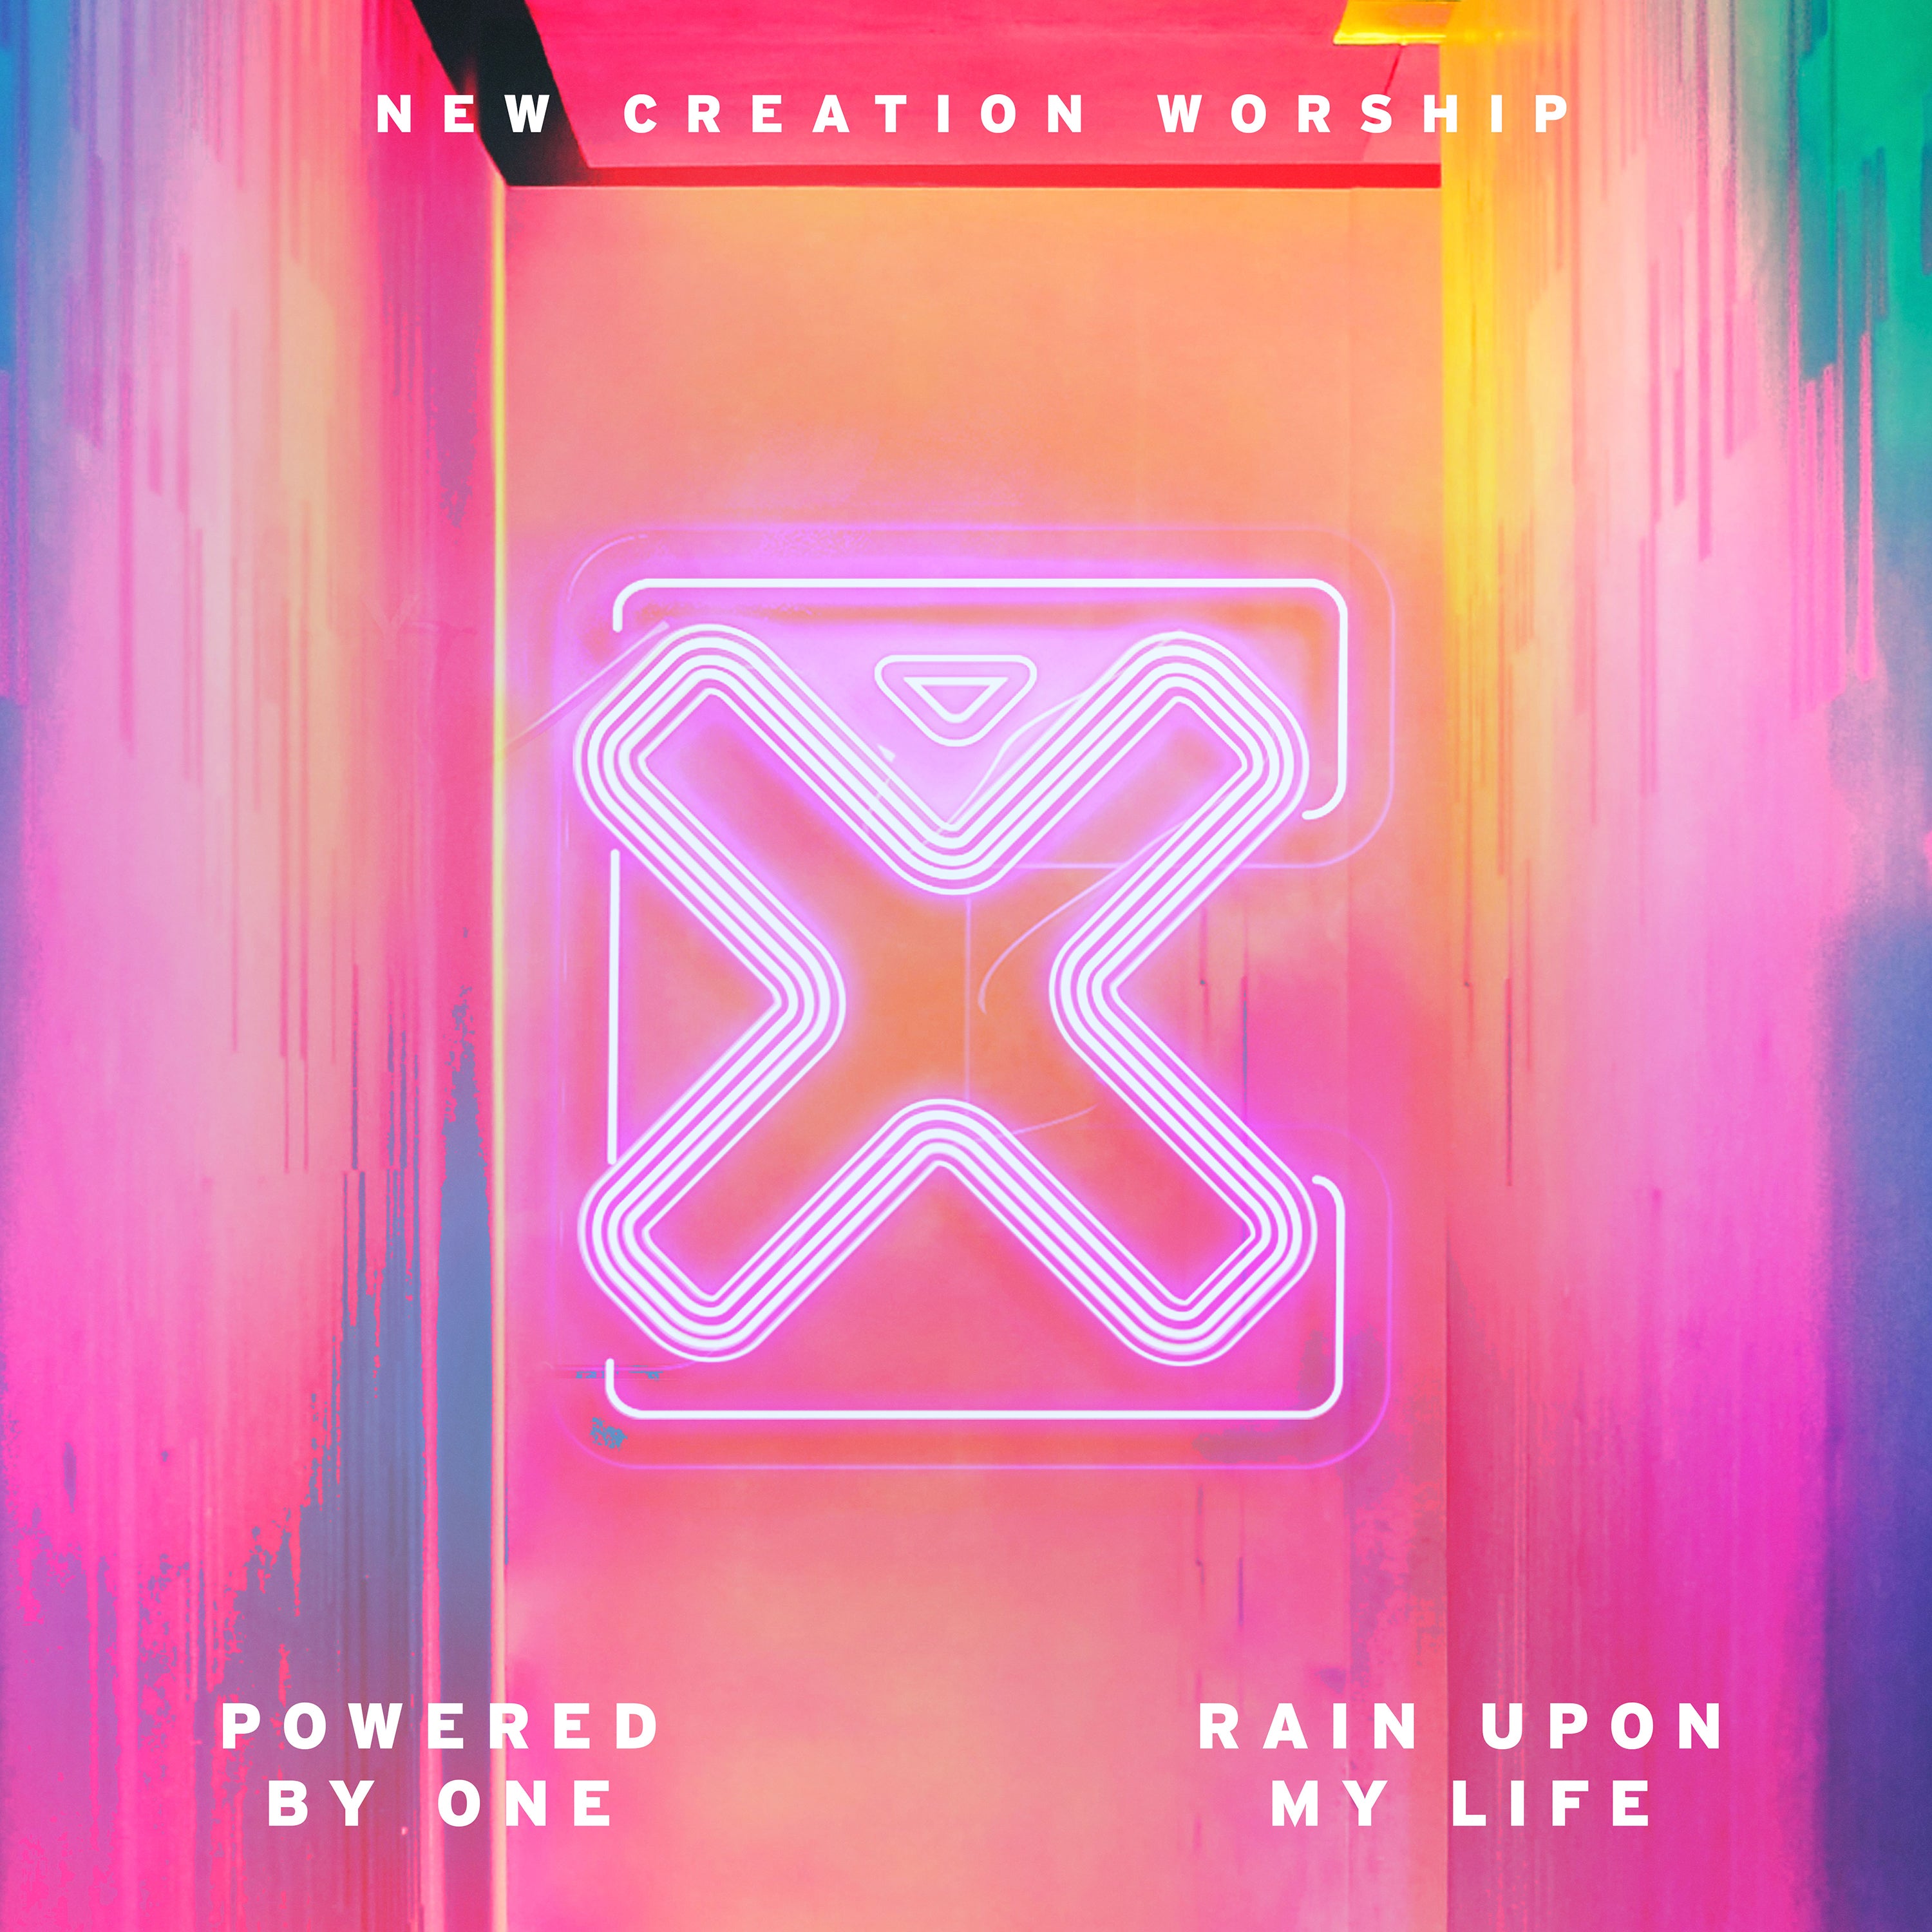 ROCKONLINE | New Creation Church | NCC | Joseph Prince | ROCK Bookshop | ROCK Bookstore | Star Vista | New Creation Worship | Youth | English Music | Christian Worship | Powered by One \ Rain upon My Life | Free delivery for Singapore orders above $50.